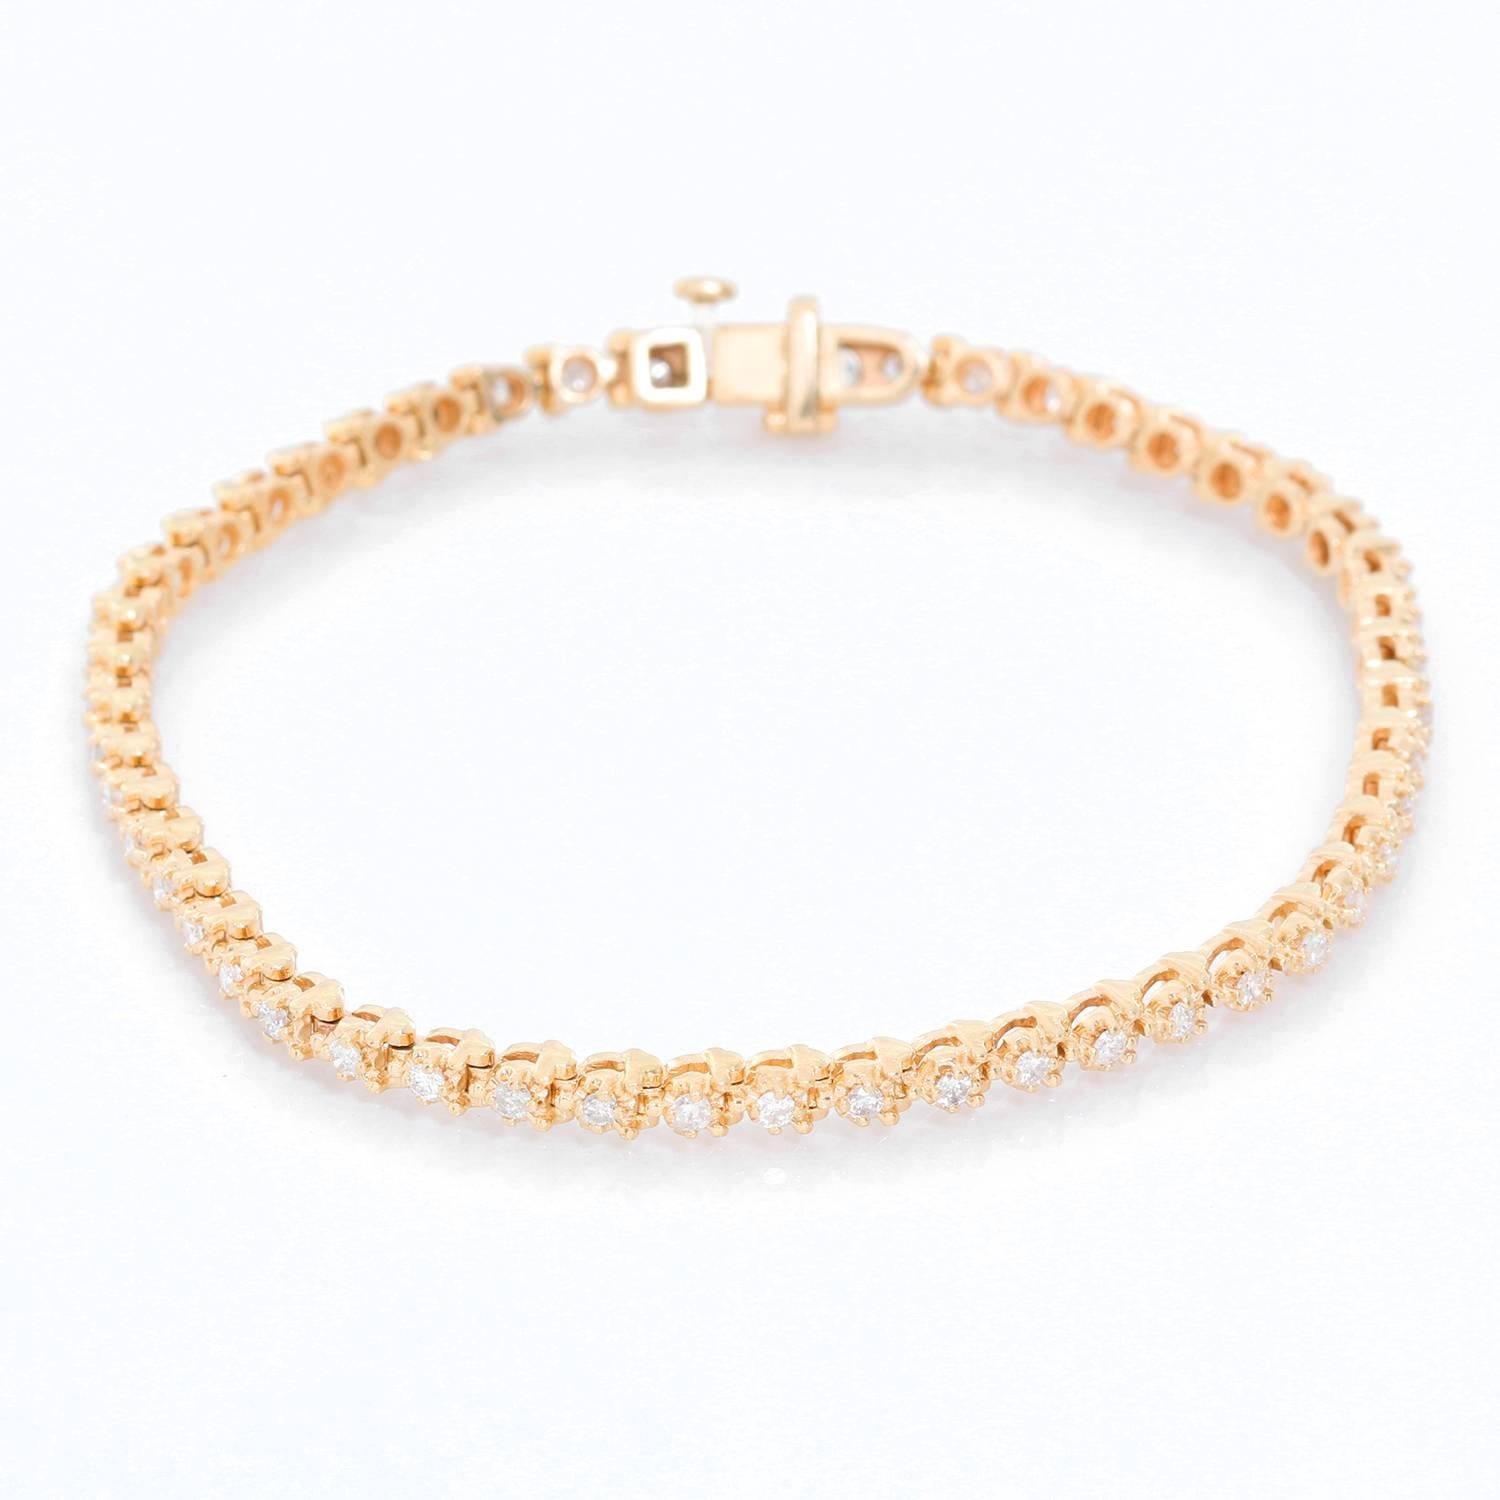 14k Yellow Gold 1.5ct. Diamond Tennis Bracelet Size 6 3/4 - . This stunning tennis bracelet features 1.5 carats of SI2-SI3 clarity and HI-color diamonds set in 14k yellow gold. Bracelet measures apx. 6 3/4 inches in length. Total weight is 9.4 grams.